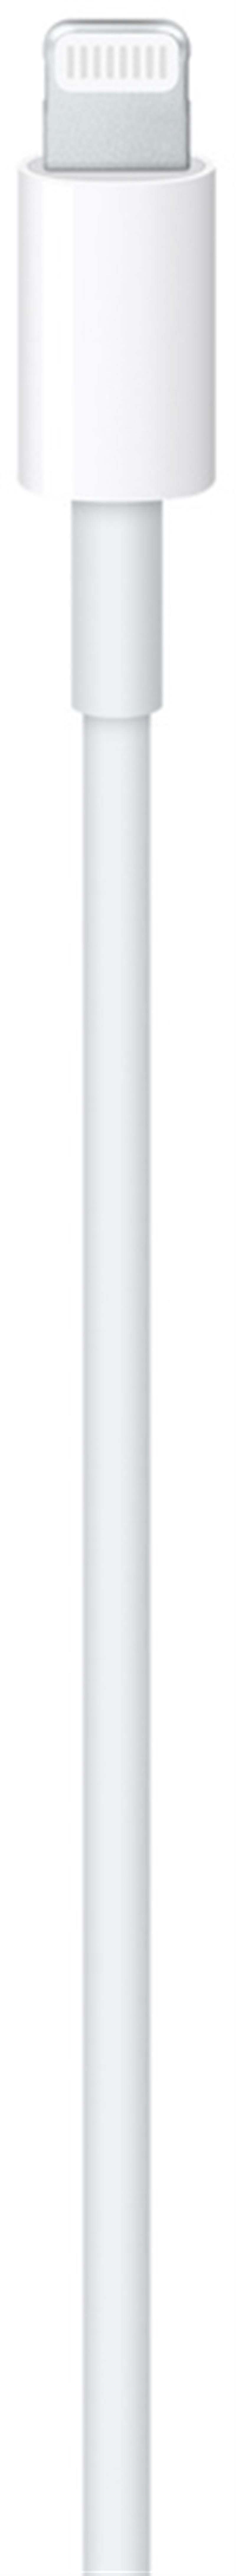  Apple USB-C to Lightning Cable 1m White